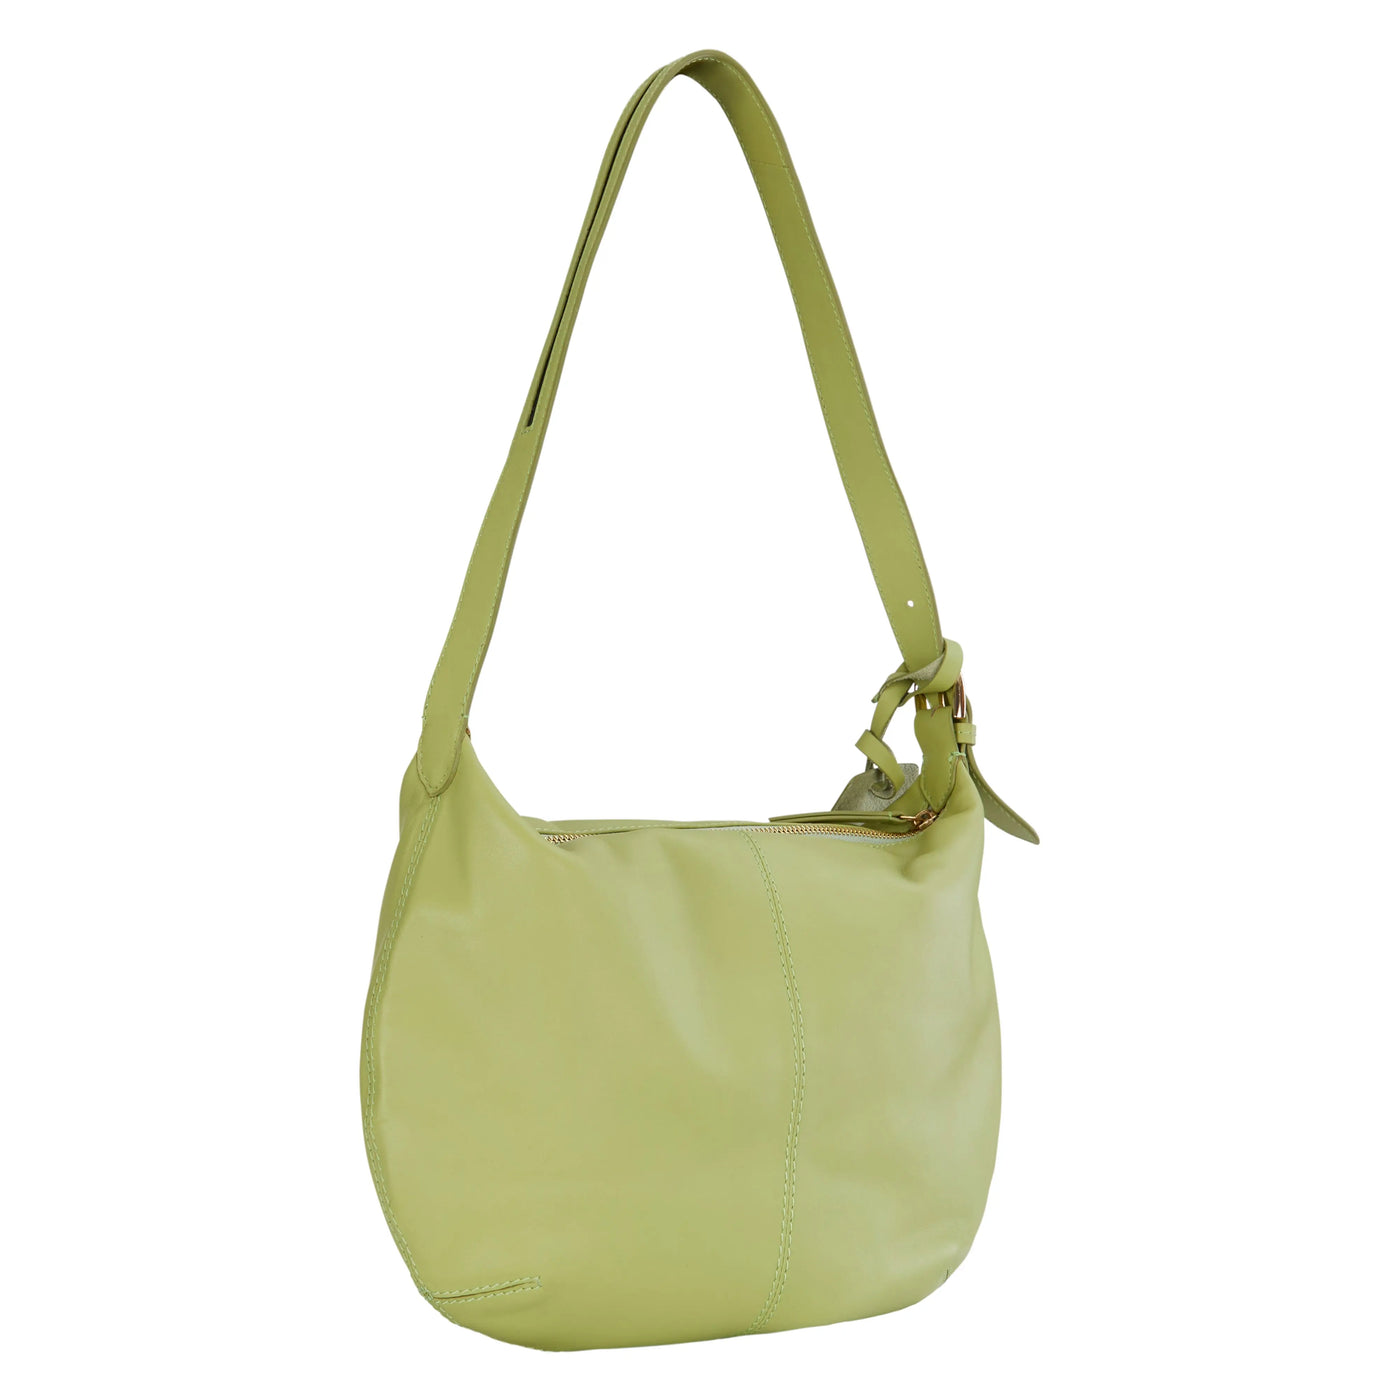 Lucy Hobo bag in 3 colors